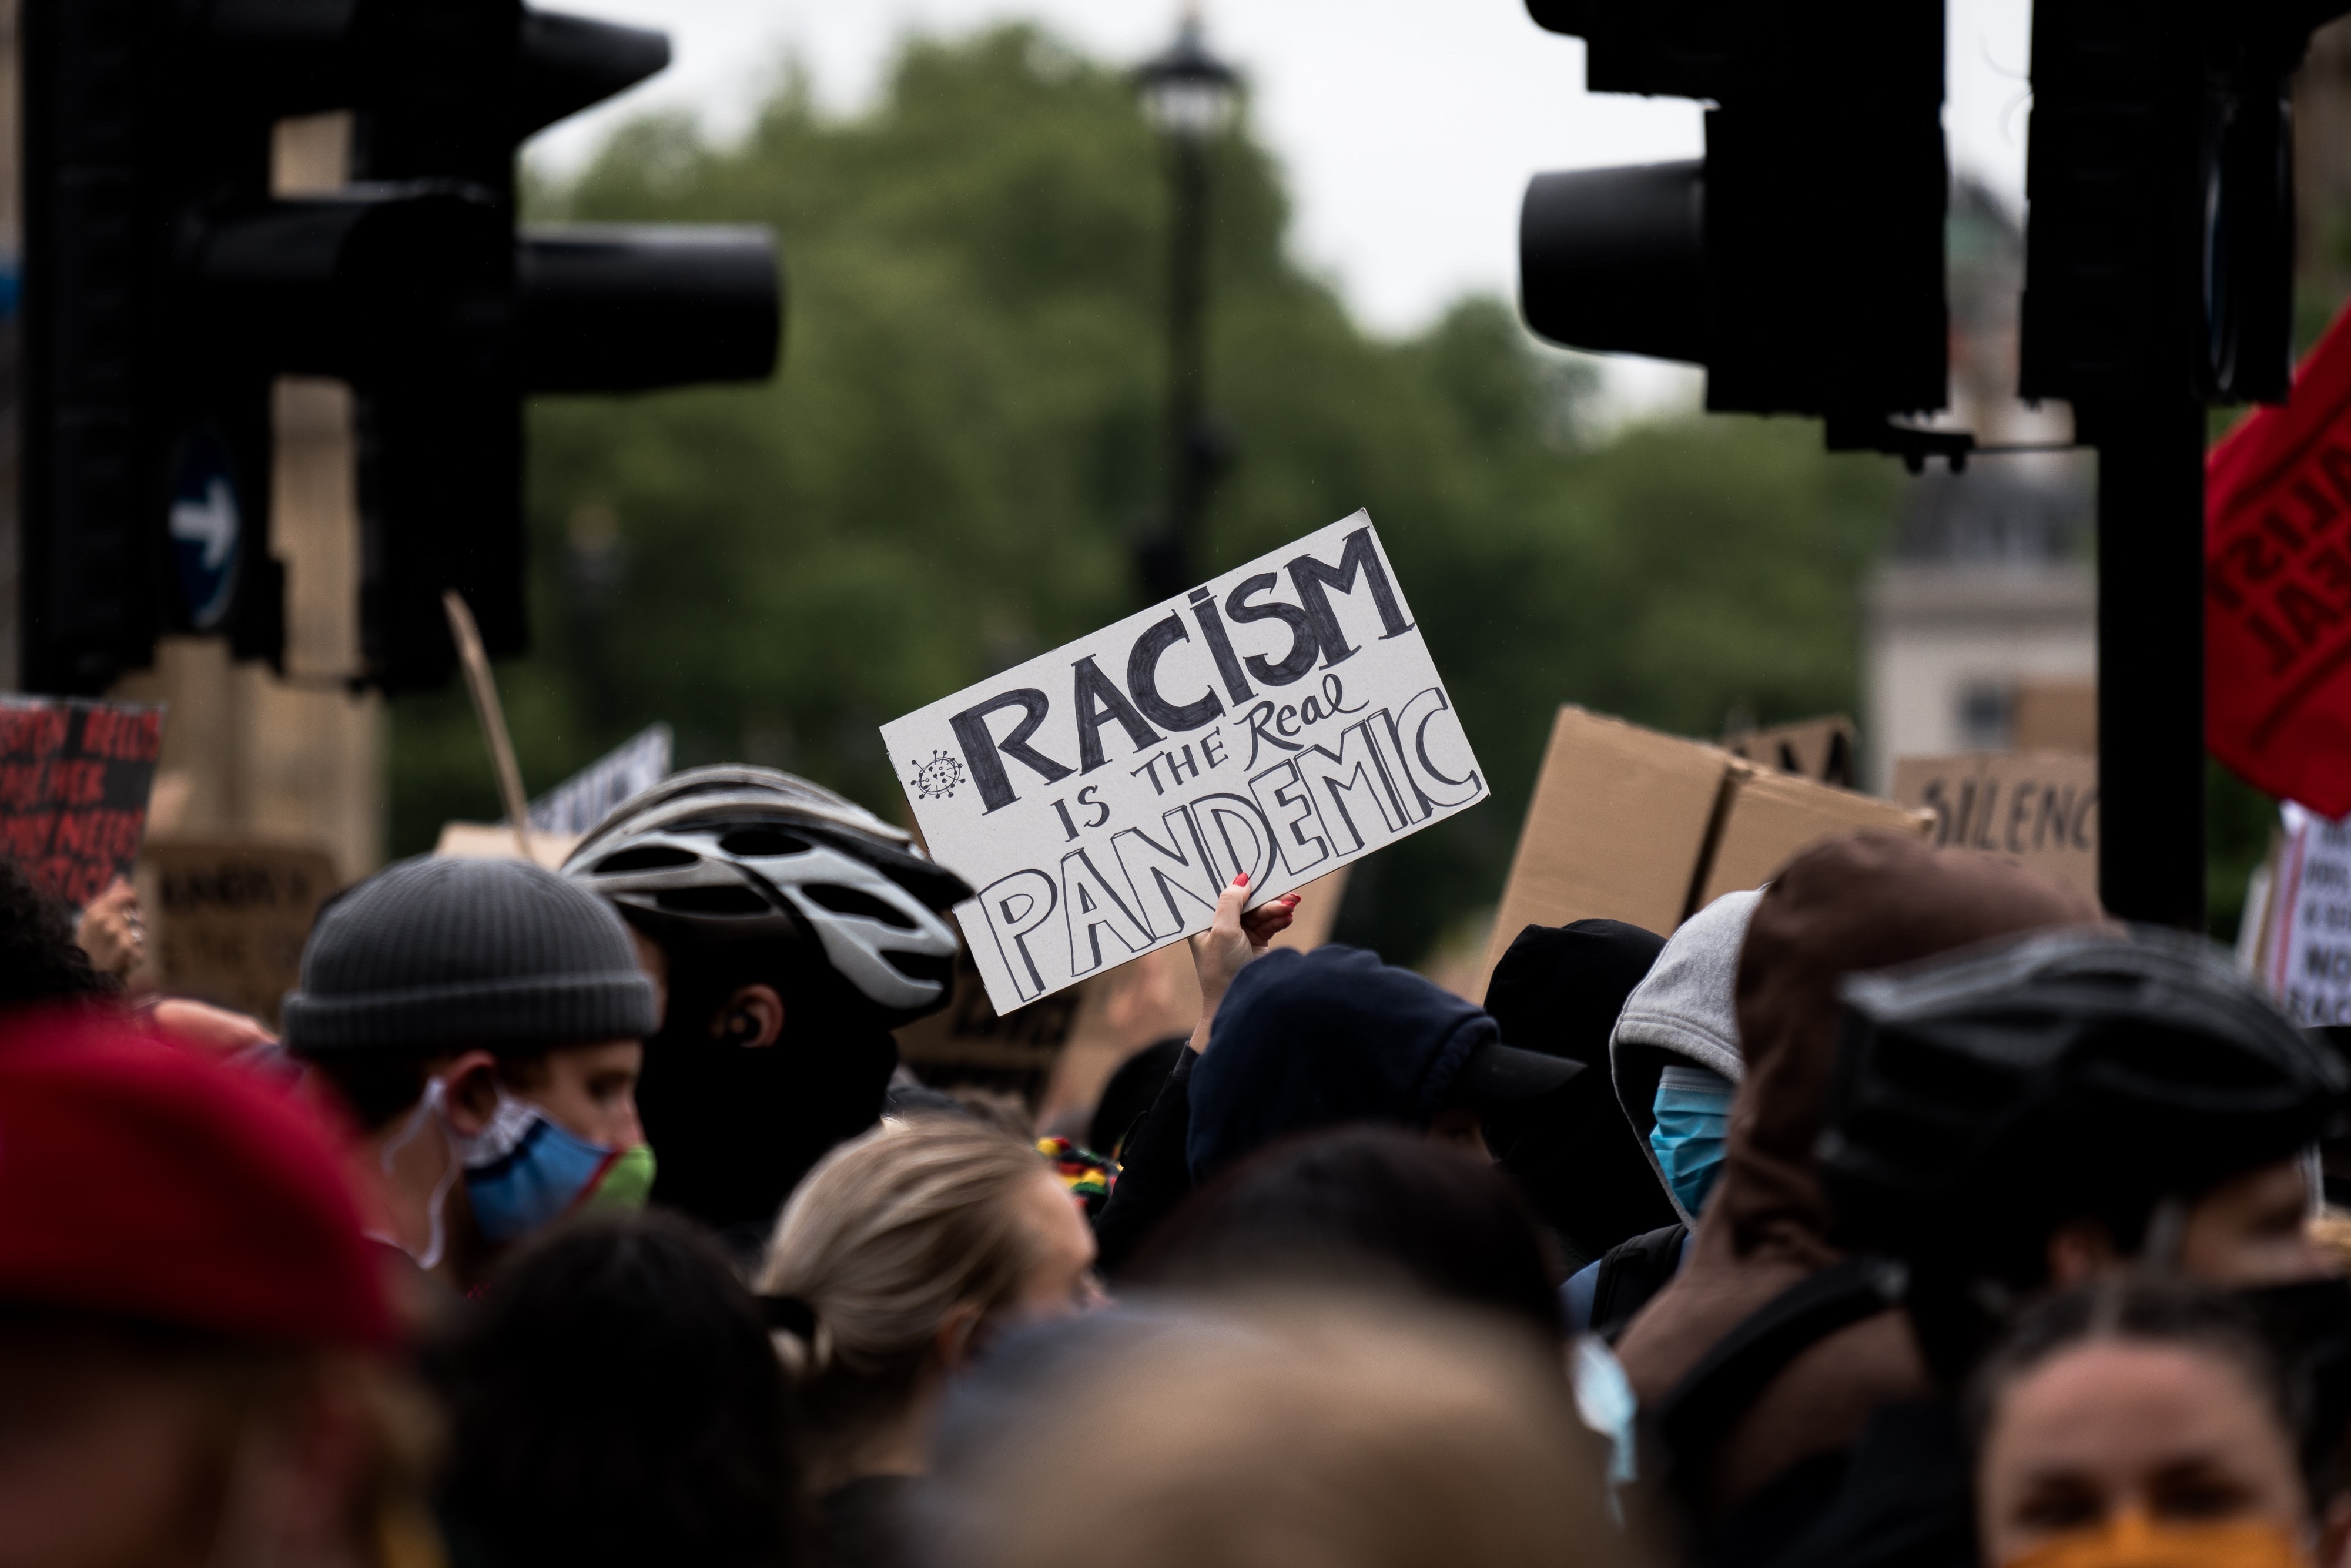 Protesting racism. Linked picture goes to actual article about Event discussed in the blog. Purpose is everything.￼